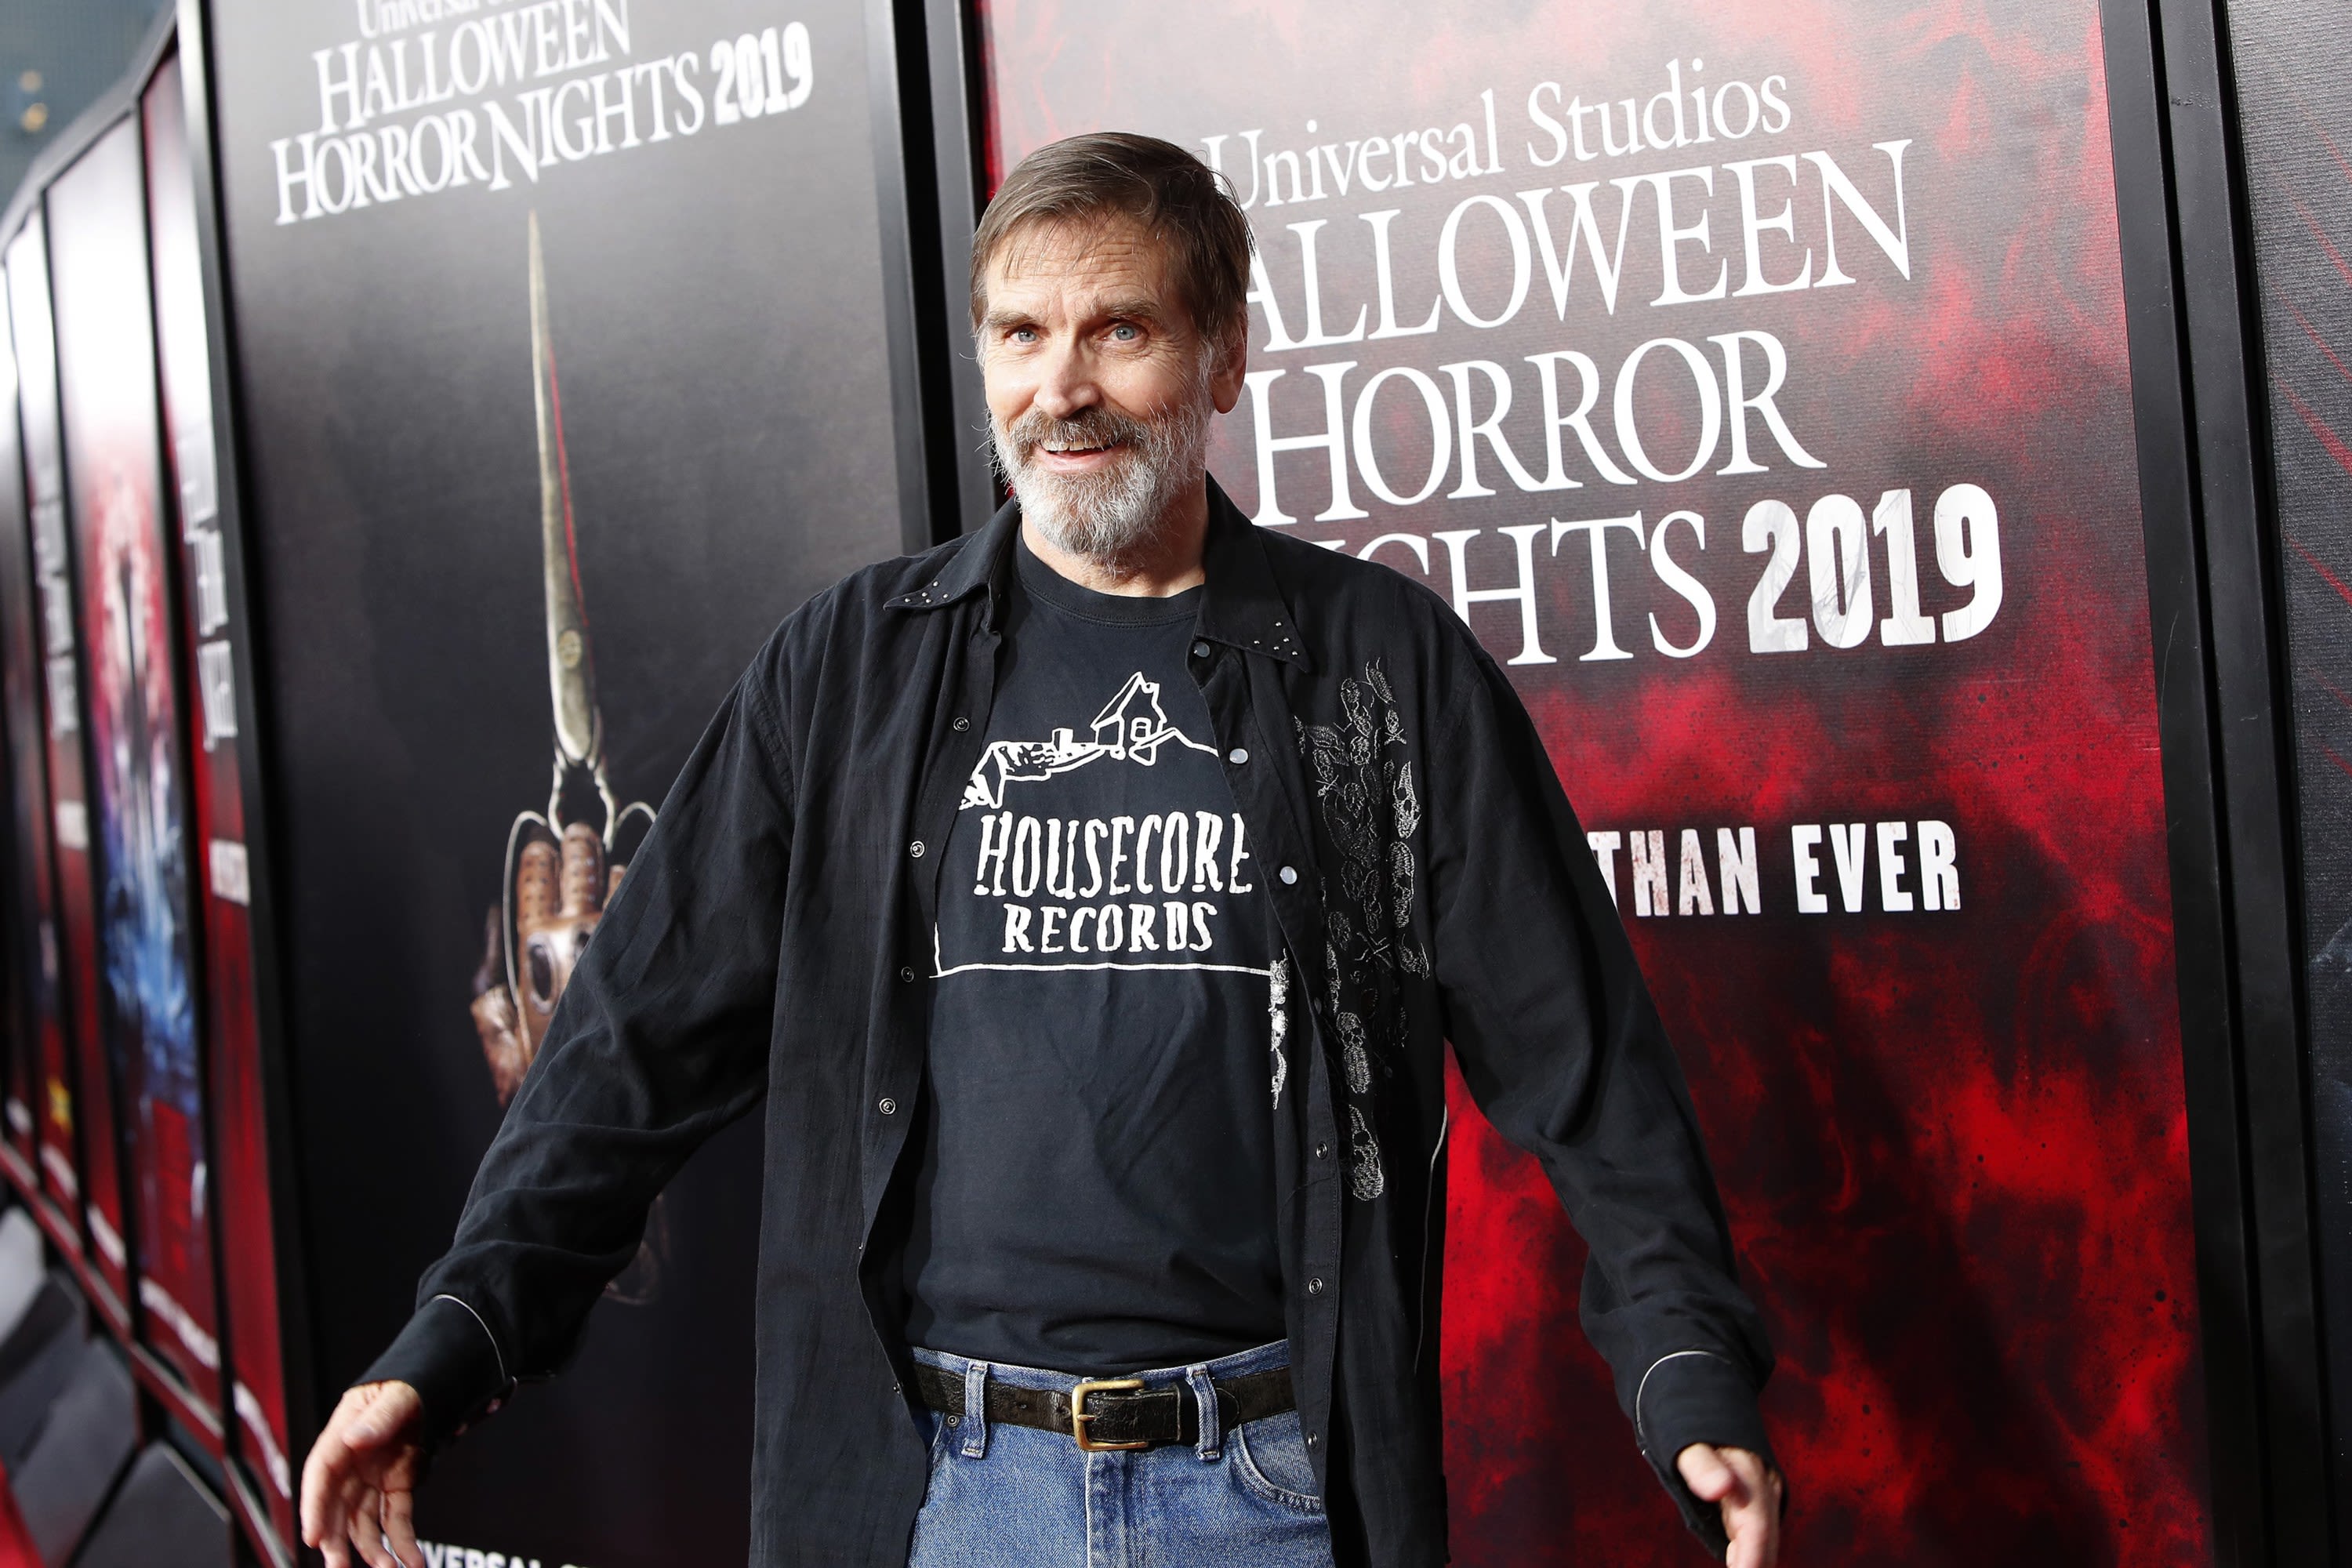 Horror Legend Bill Moseley Joins Cast of ‘Terrifier’ Team’s Upcoming Slasher ‘Stream’ (EXCLUSIVE)